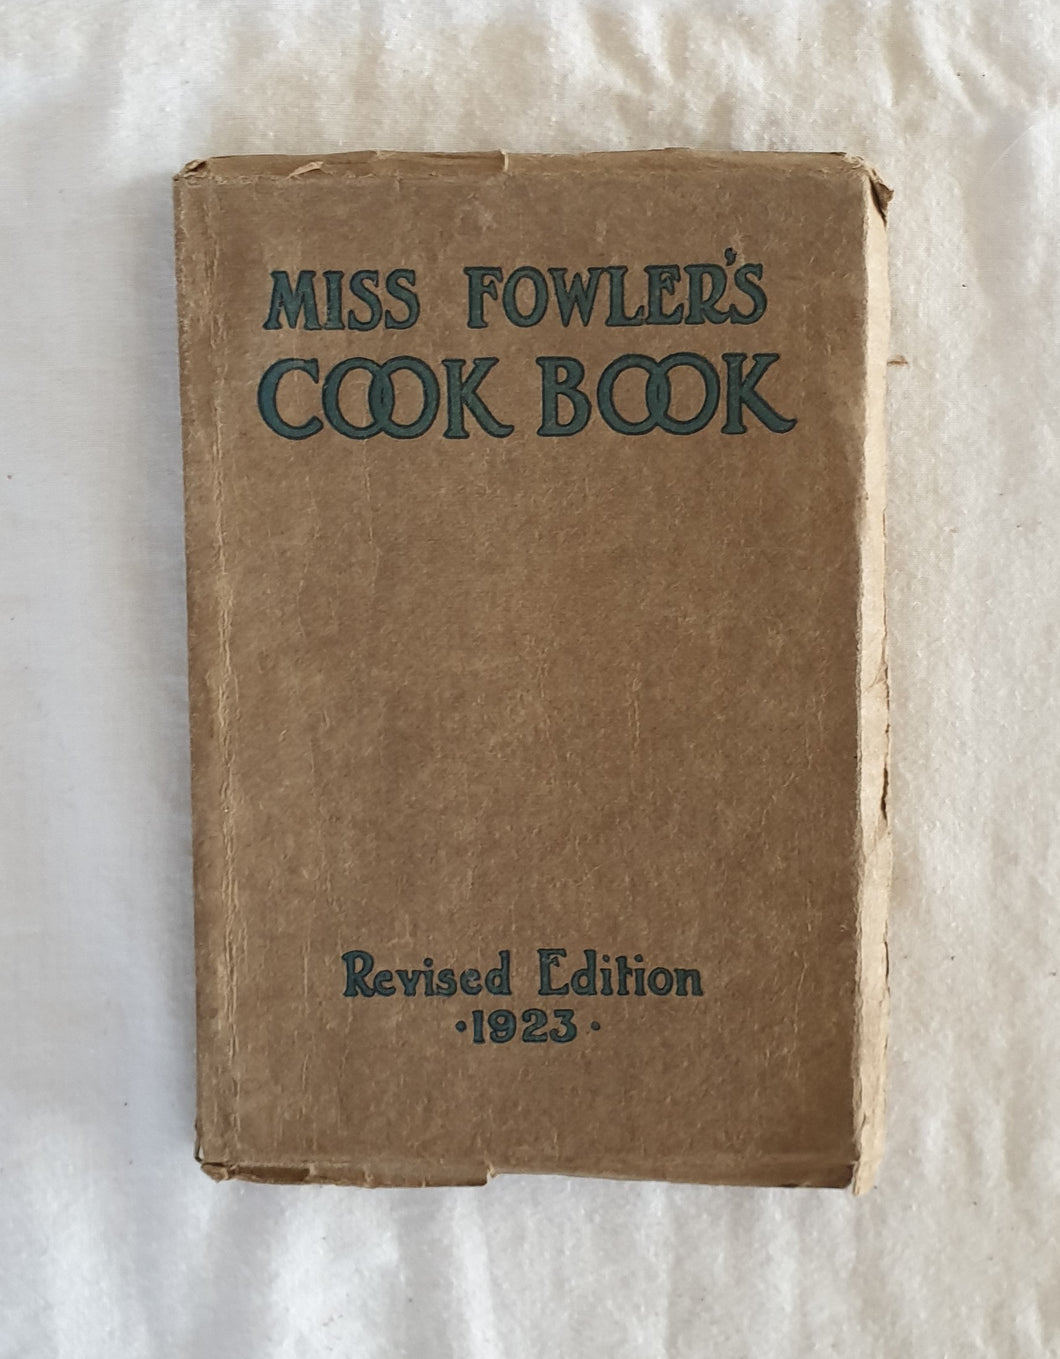 Miss Fowler's Cook Book  by Lily F. Fowler